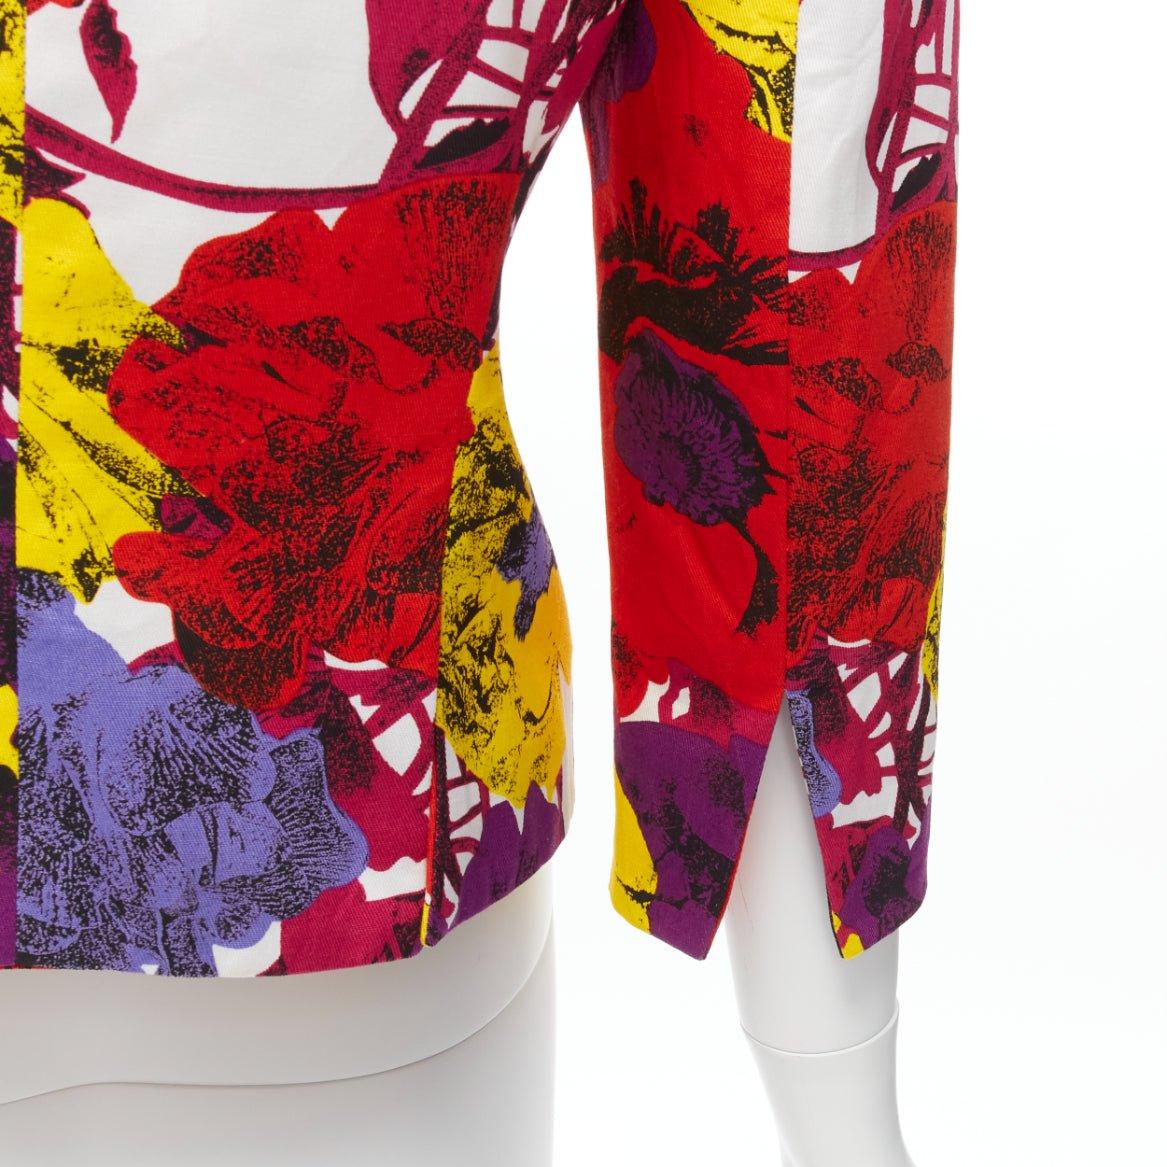 GIANNI VERSACE Vintage Pop Art Rose print corseted cropped jacket IT40 S
Reference: TGAS/D00415
Brand: Gianni Versace
Designer: Gianni Versace
Material: Cotton
Color: Red, Yellow
Pattern: Floral
Closure: Hook & Eye
Lining: White Fabric
Extra